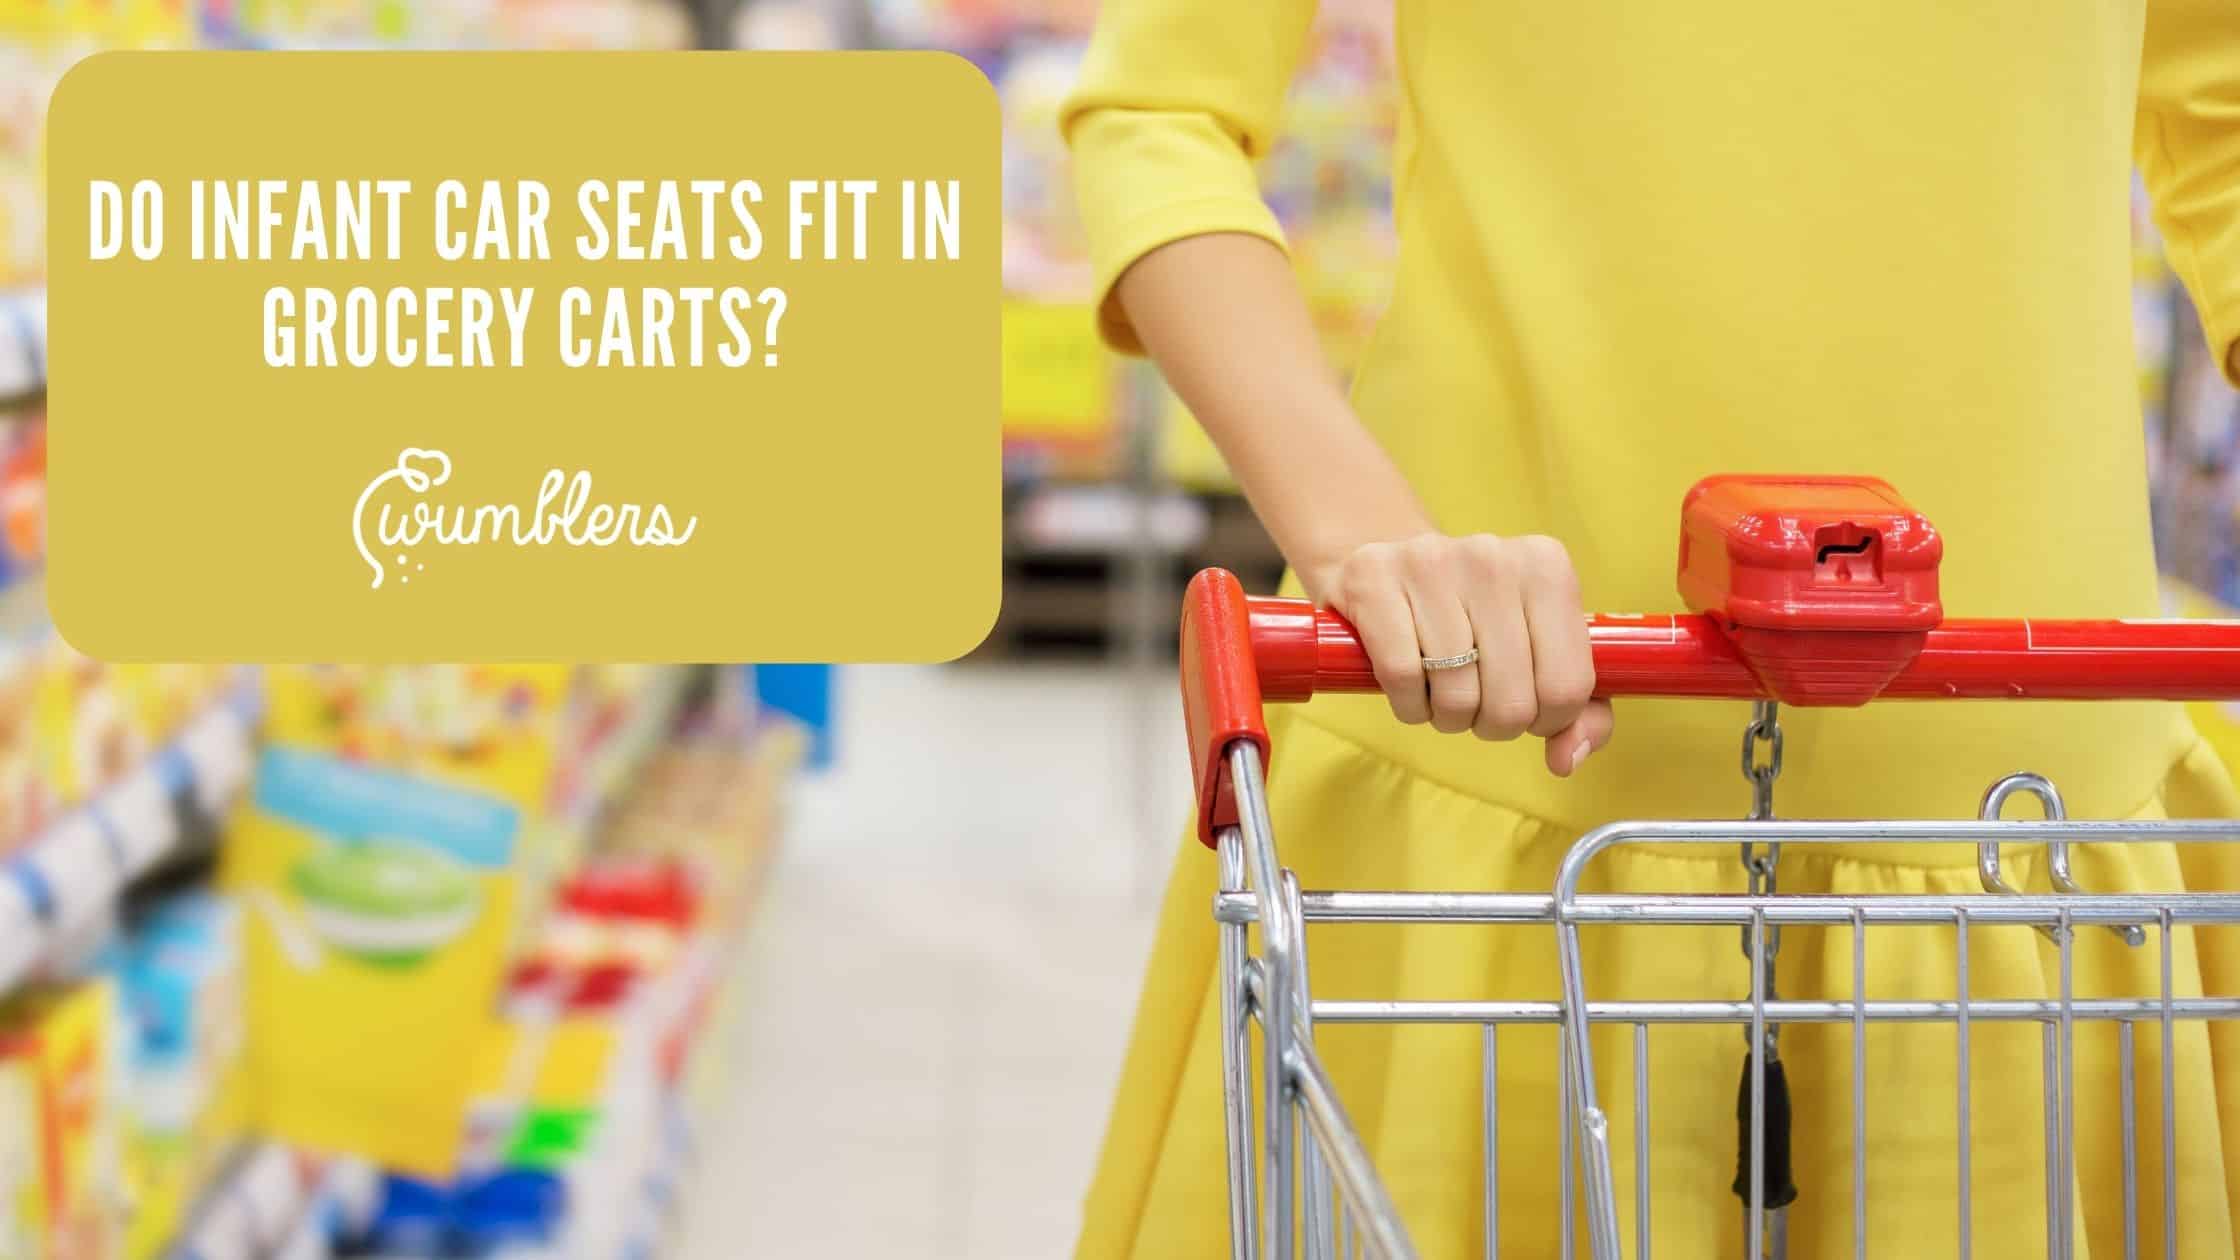 Do Infant Car Seats Fit in Grocery Carts